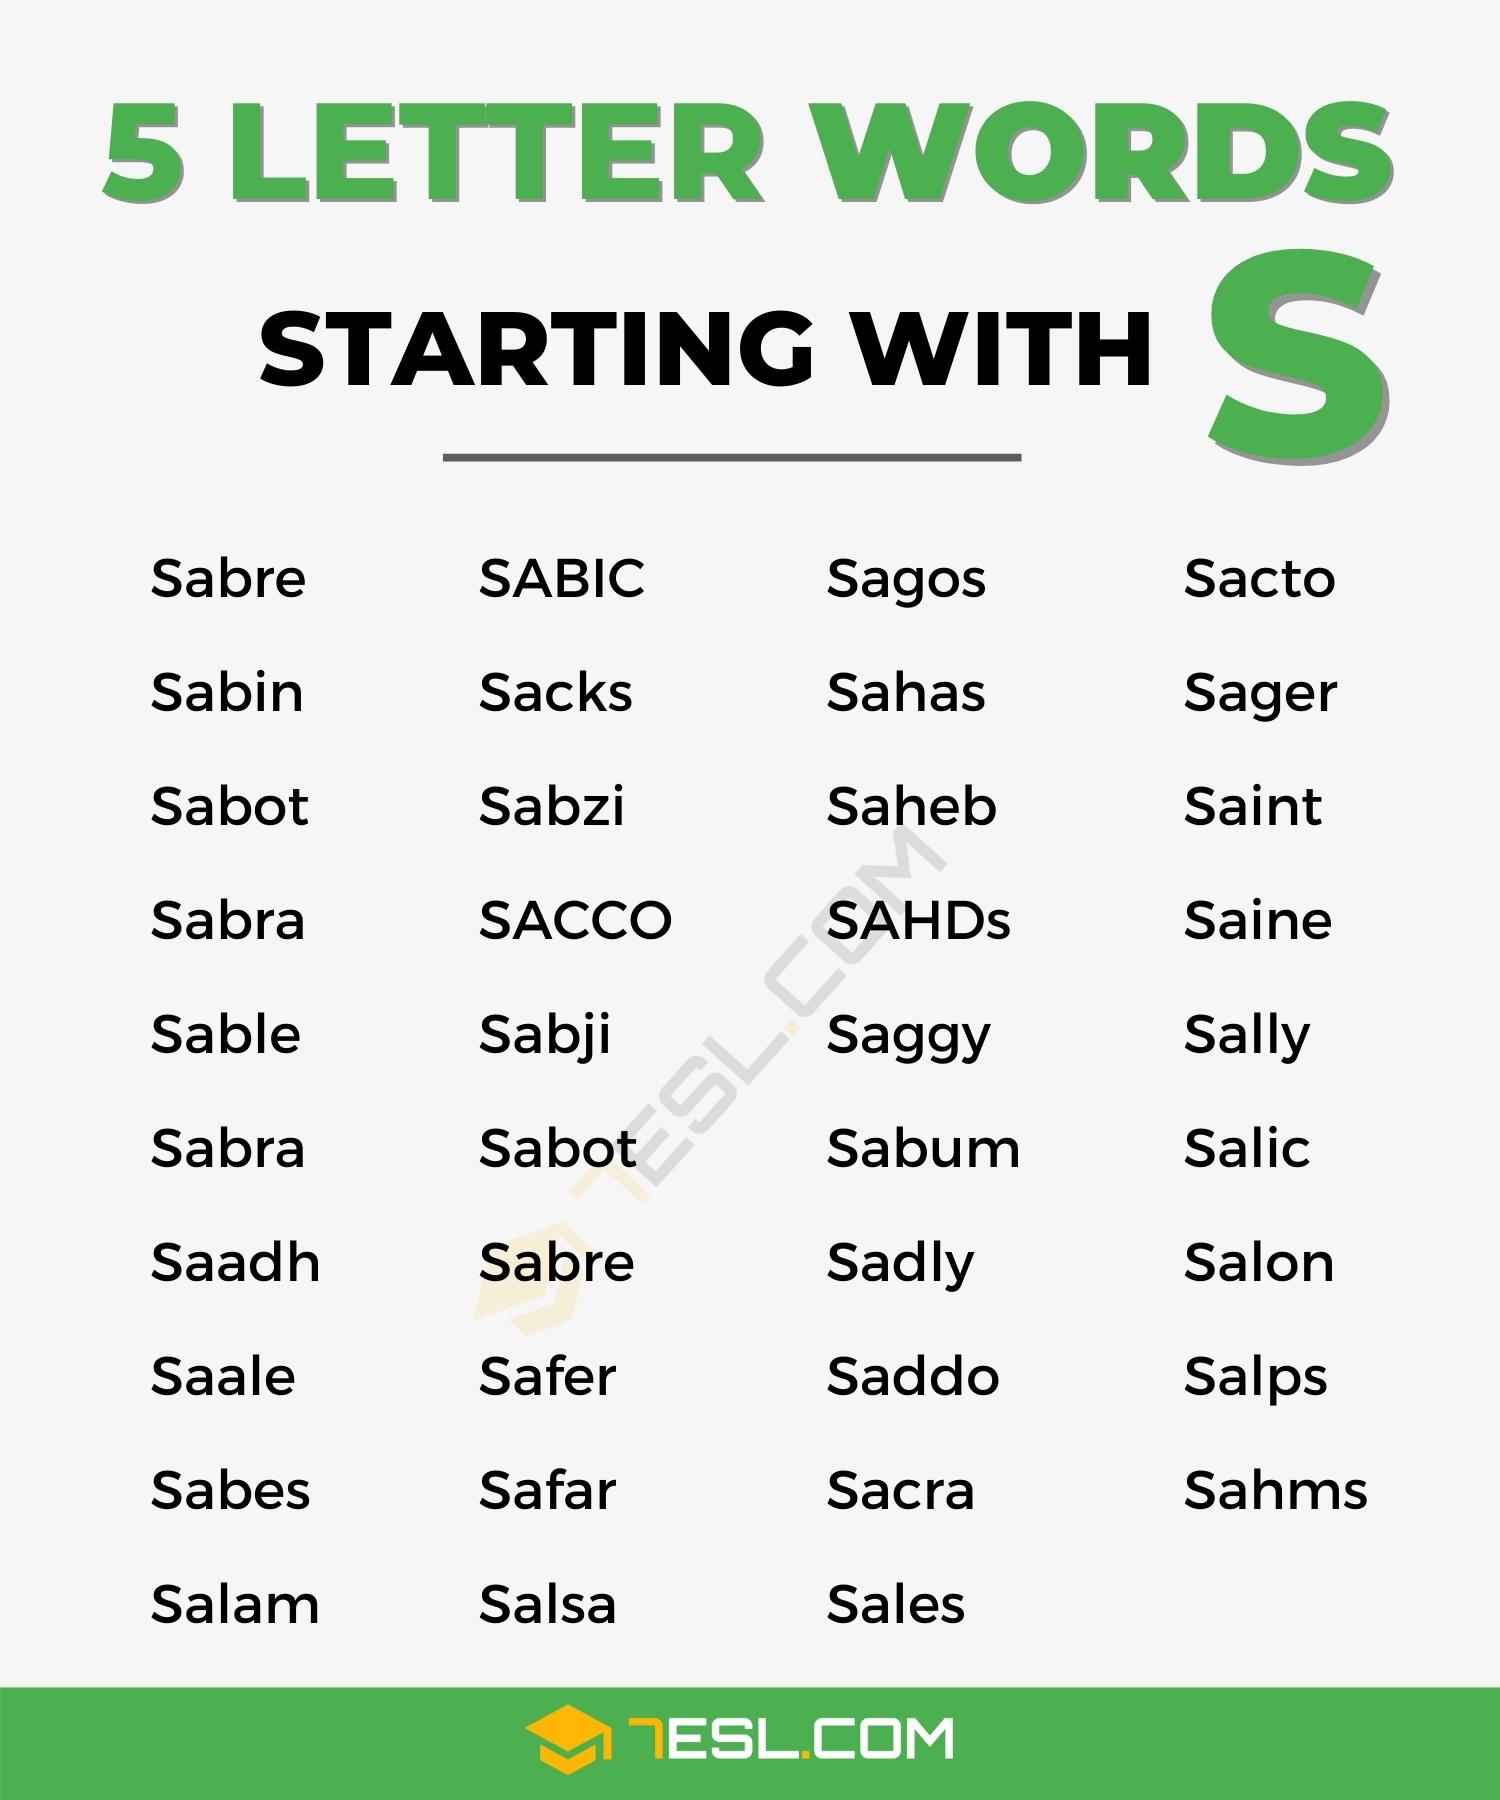 5 Letter Words That Start With S